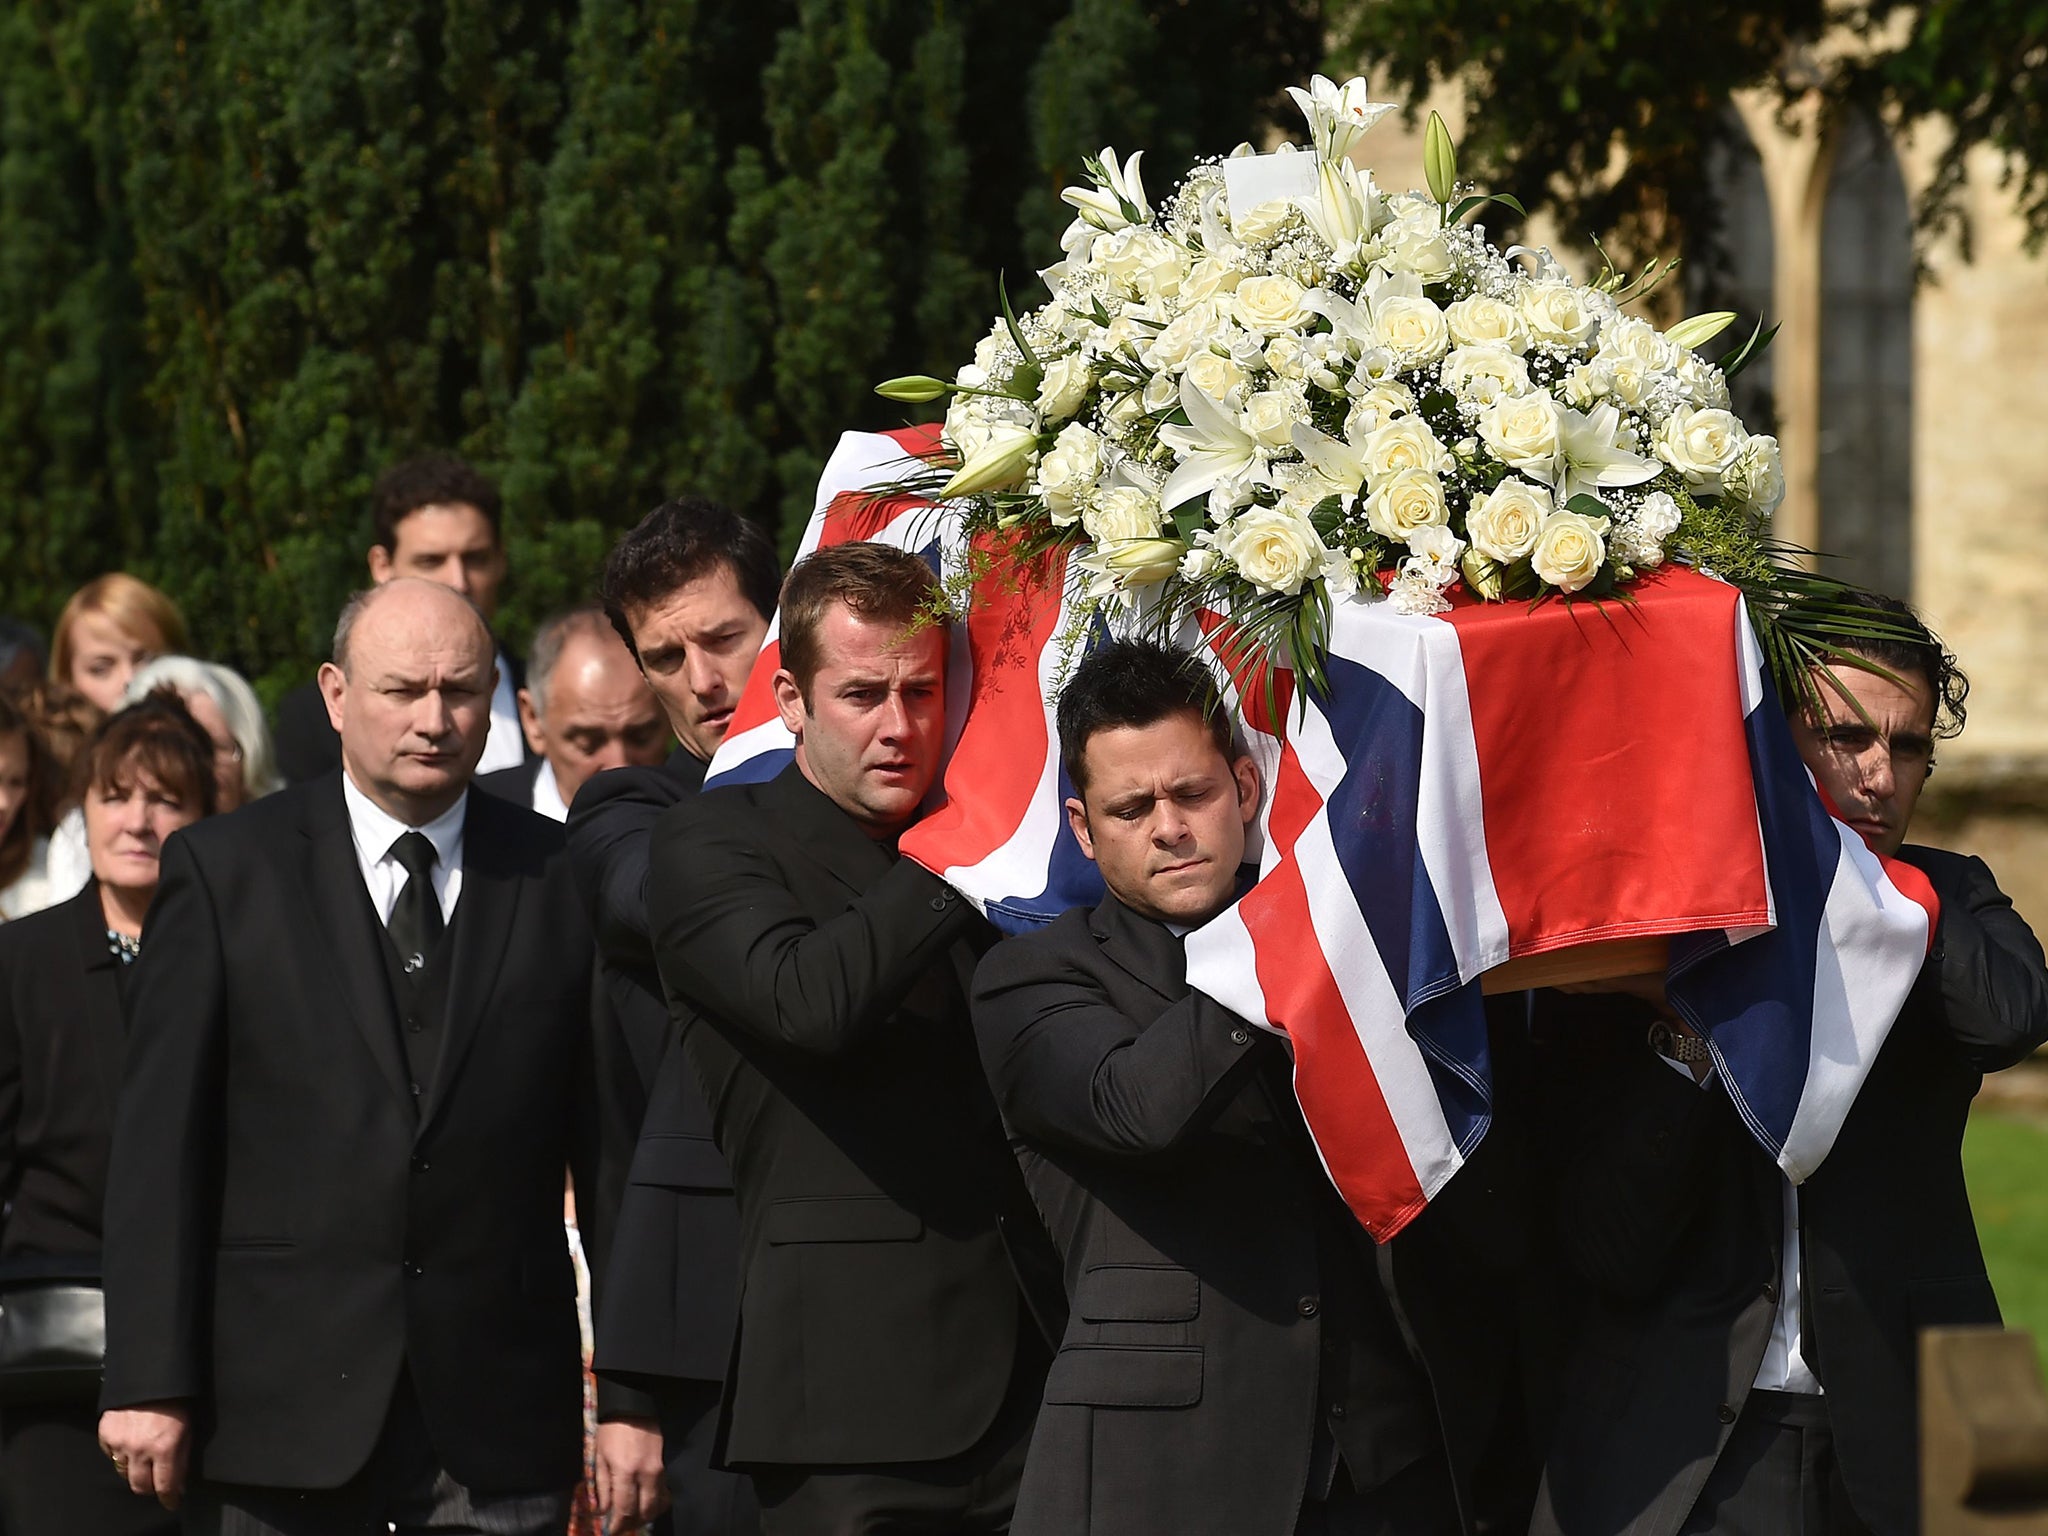 The coffin of Justin Wilson is carried Mark Webber (back left) and Dario Franchitti (right) after his funeral at St James the Great Church in Paulerspury